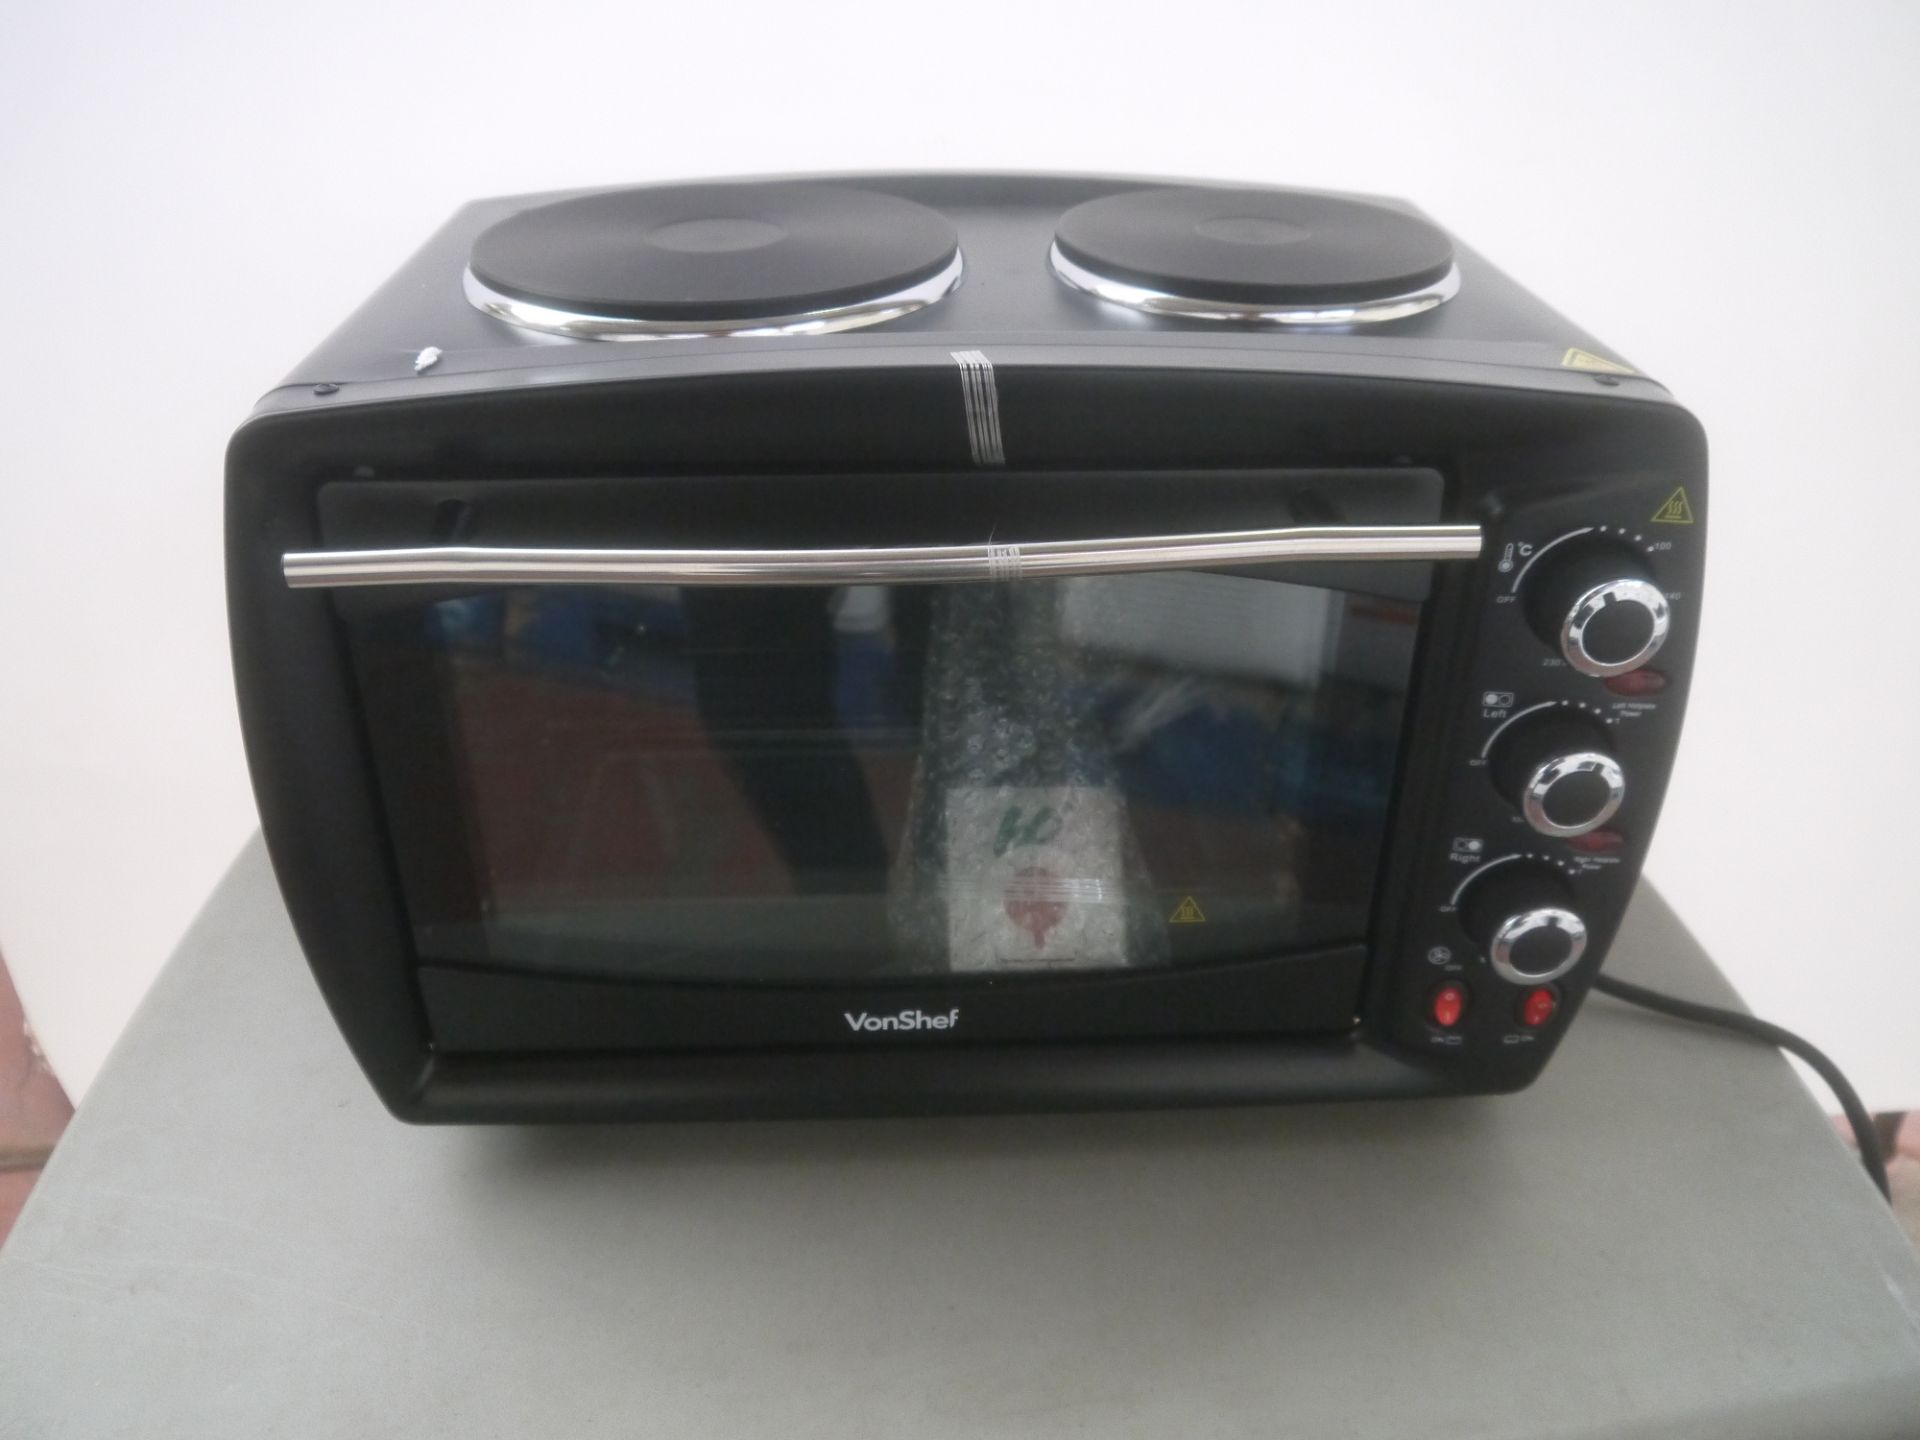 VonShef toaster oven and hotplates, 26L, tested working and boxed.